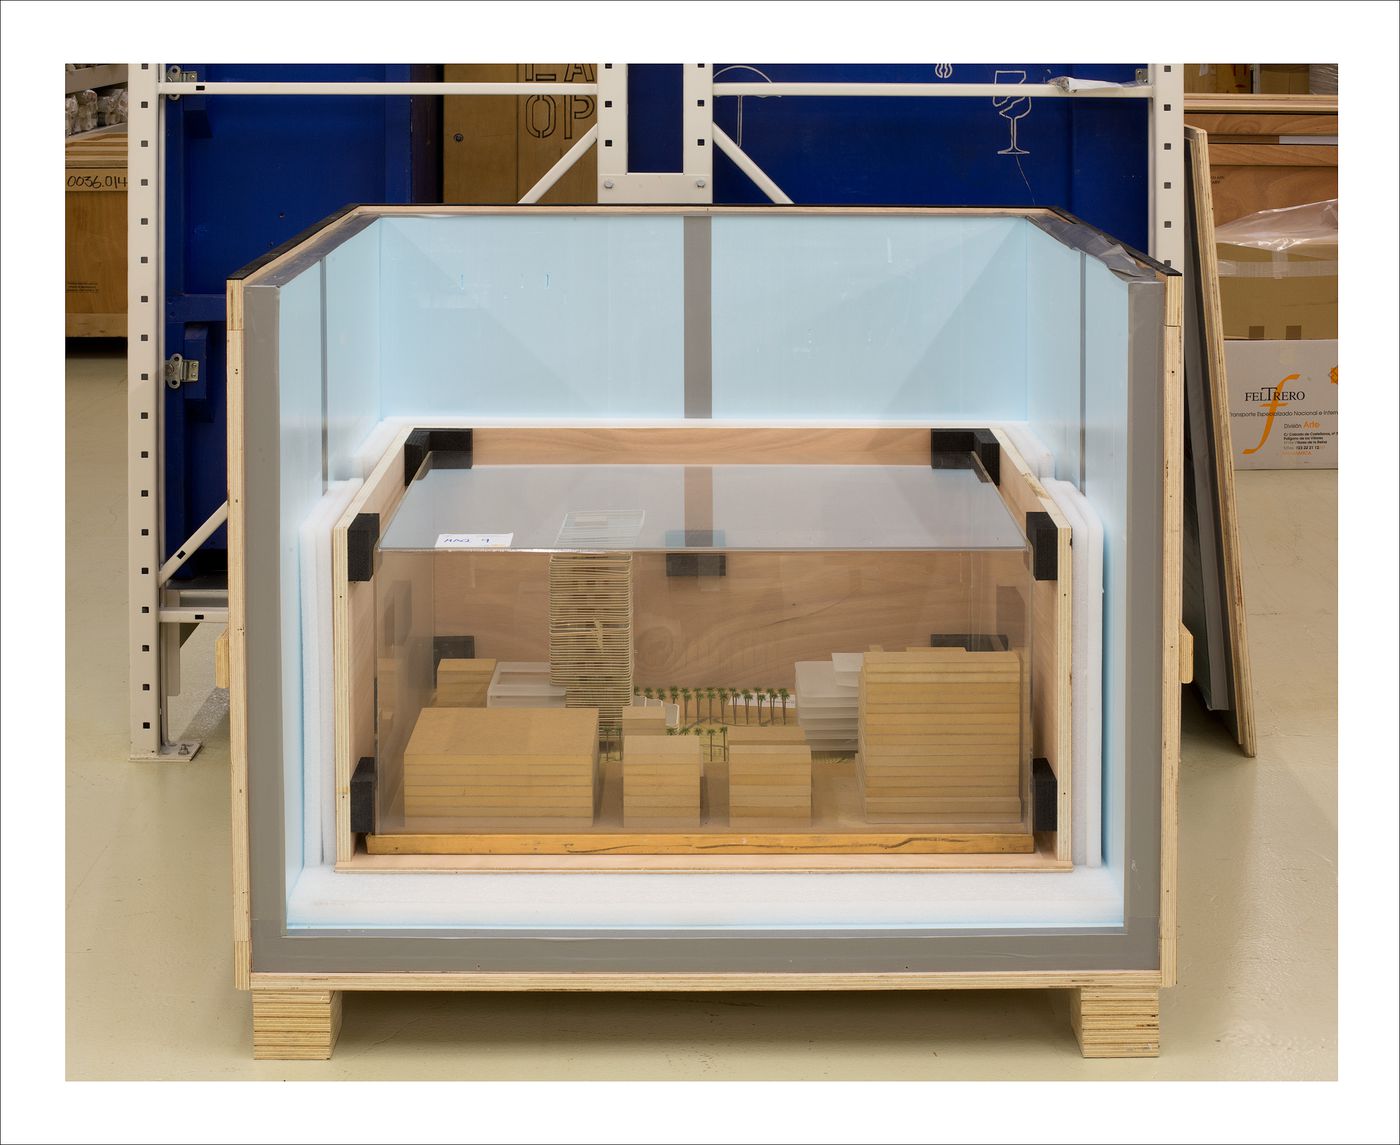 Proofs of Relevance: View of a model in a crate showing Woermann Public Square and Building, Abalos & Herreros (2001), Las Palmas de Gran Canaria, Spain